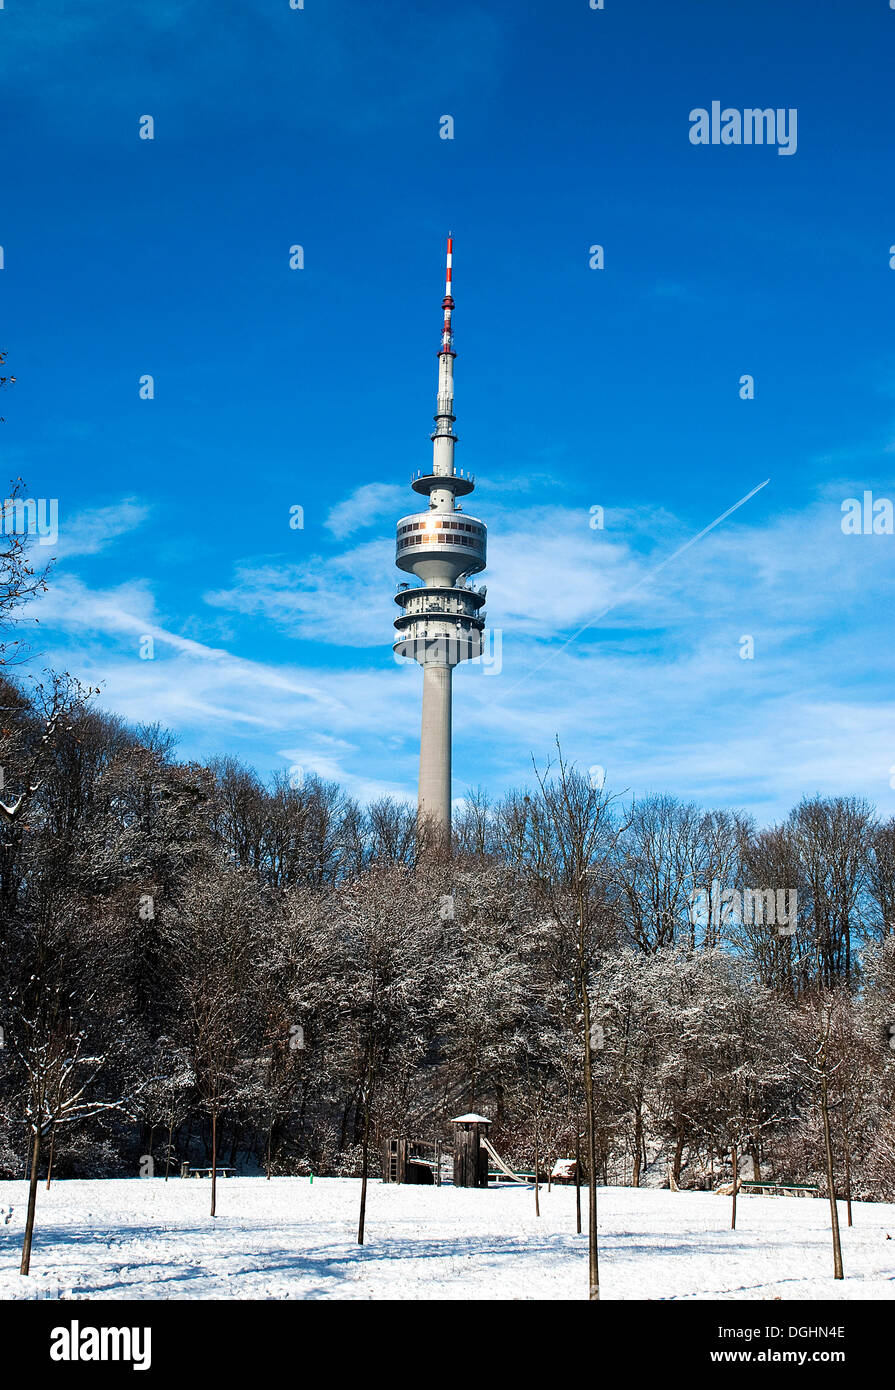 Olympiaturm tower in the Olympiapark area in Munich, Bavaria Stock Photo